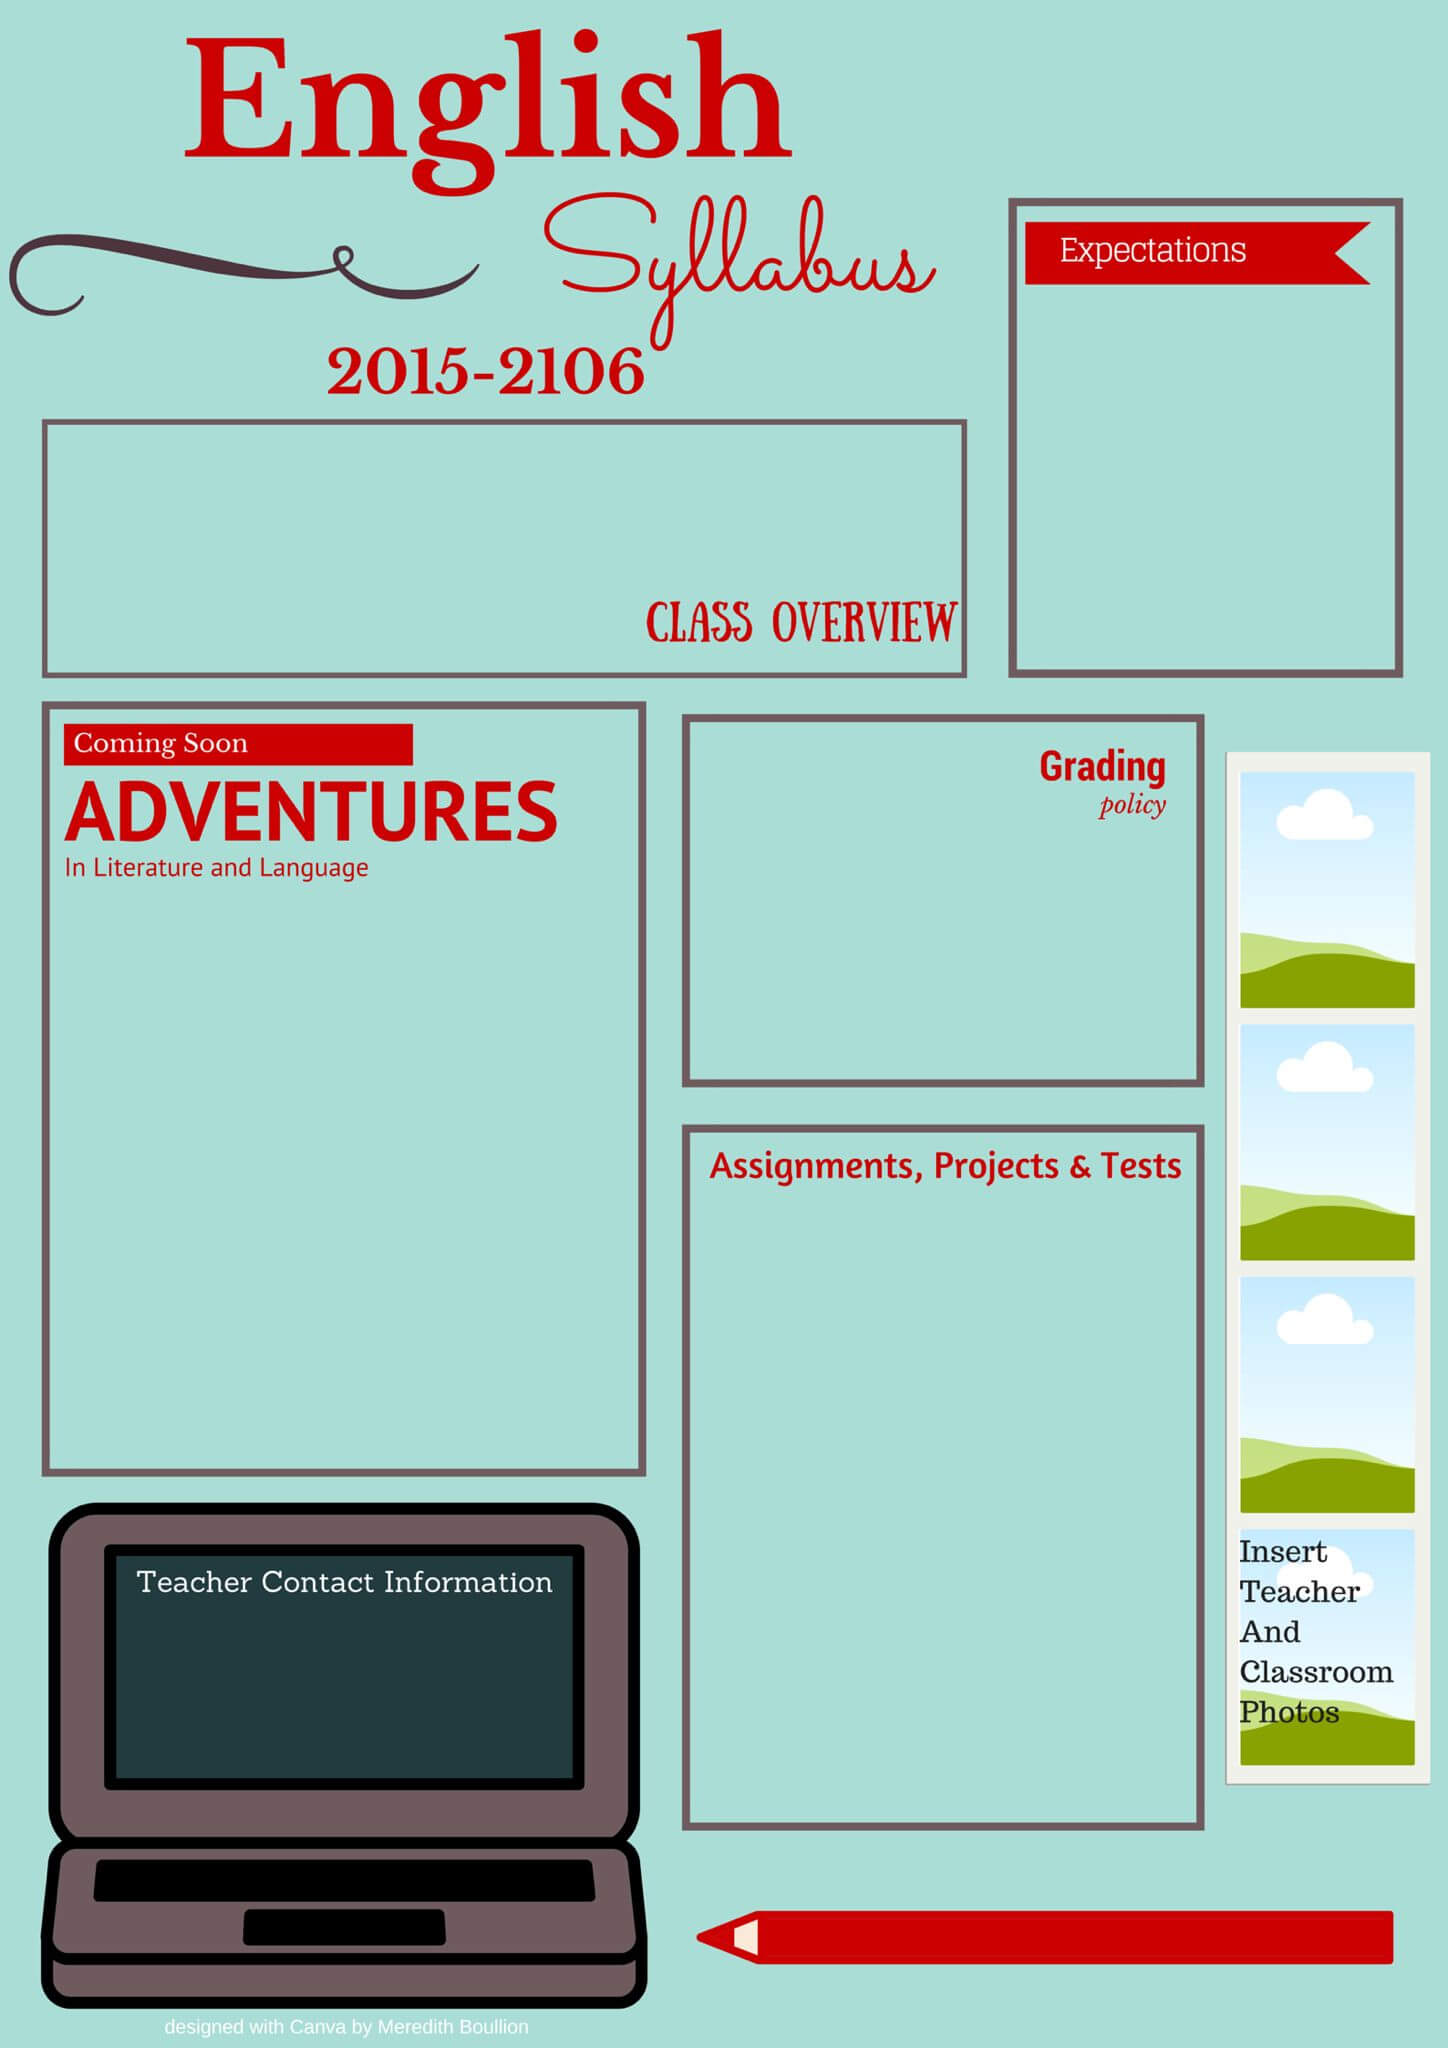 Visual Syllabus Template Made With Canva | High School Throughout Blank Syllabus Template